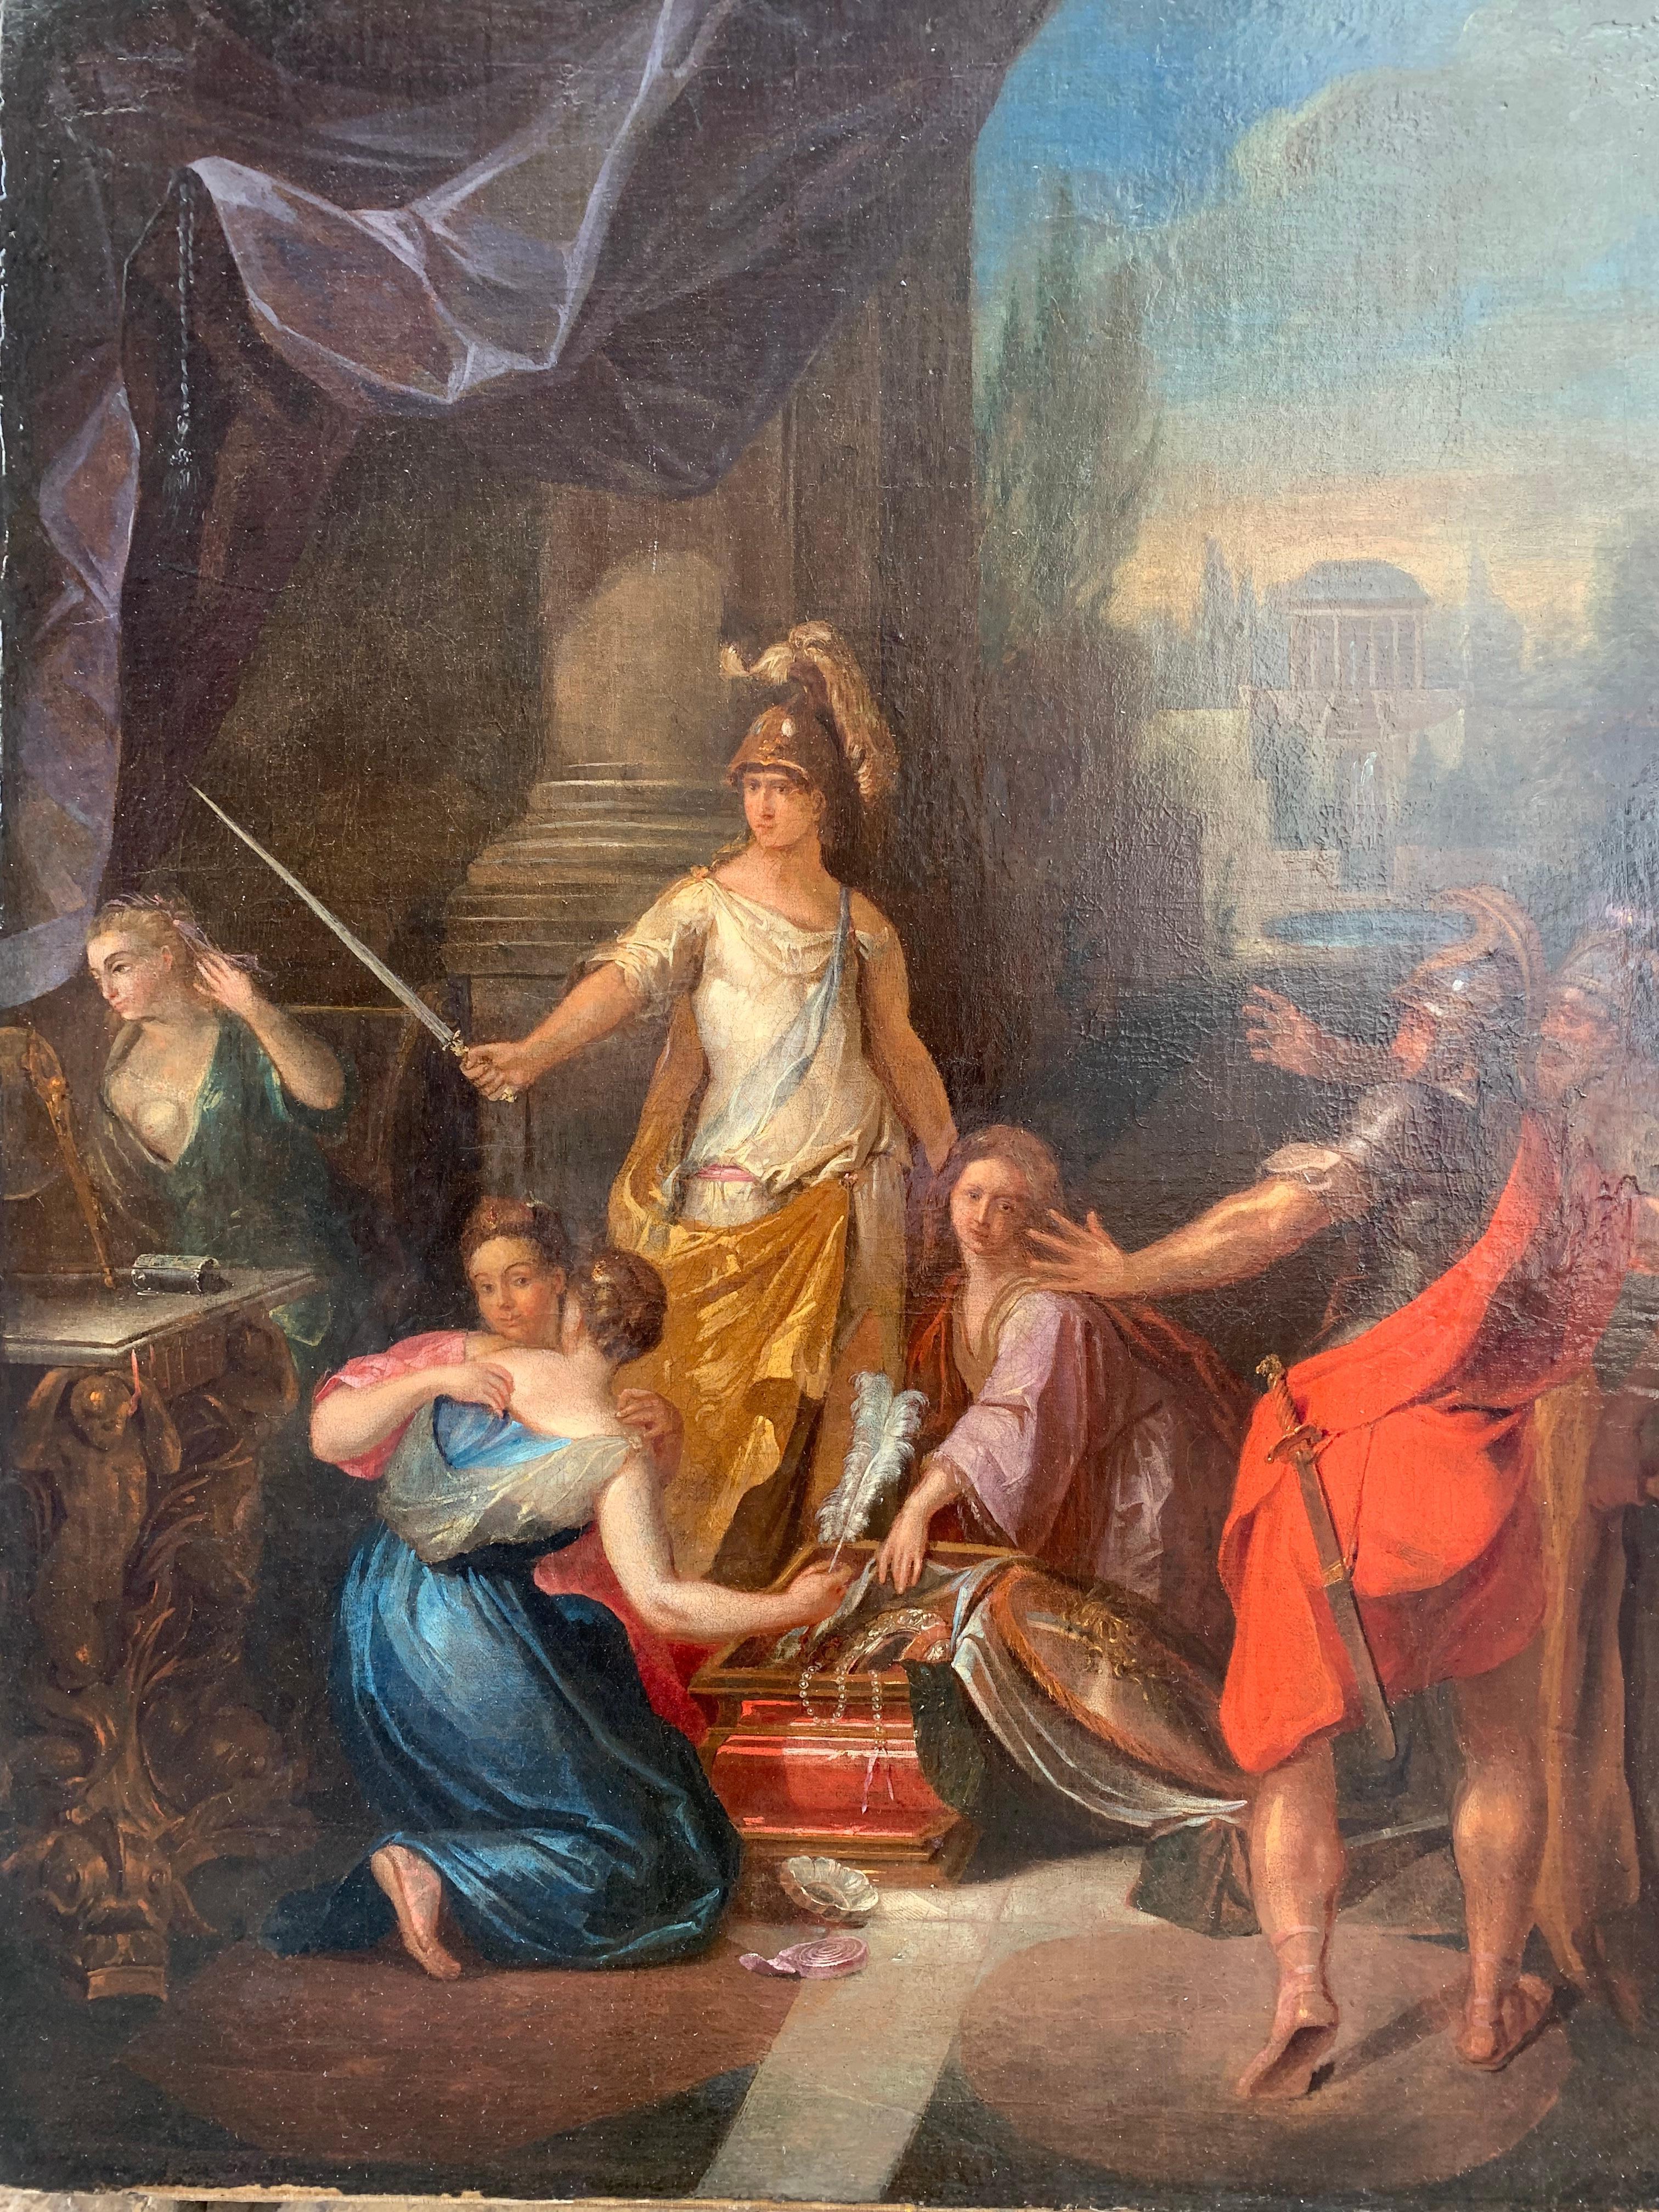 Achilles in the guise of a woman discovered by Ulysses. Dutch school, circa 1720 6